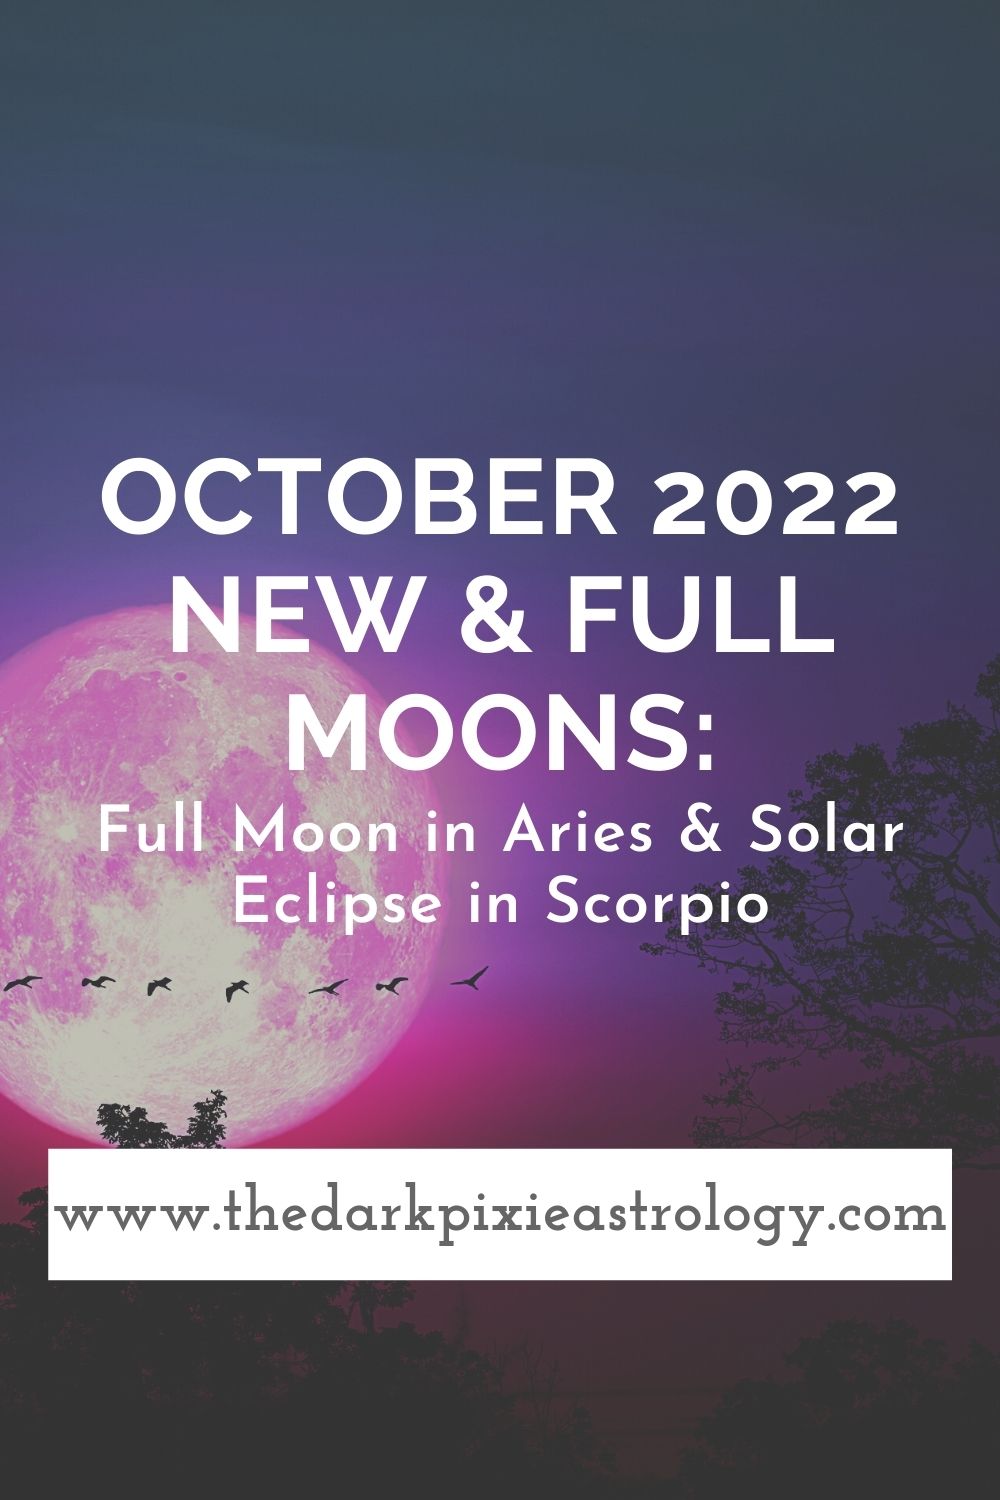 October 2022 New & Full Moons Full Moon in Aries & Solar Eclipse in